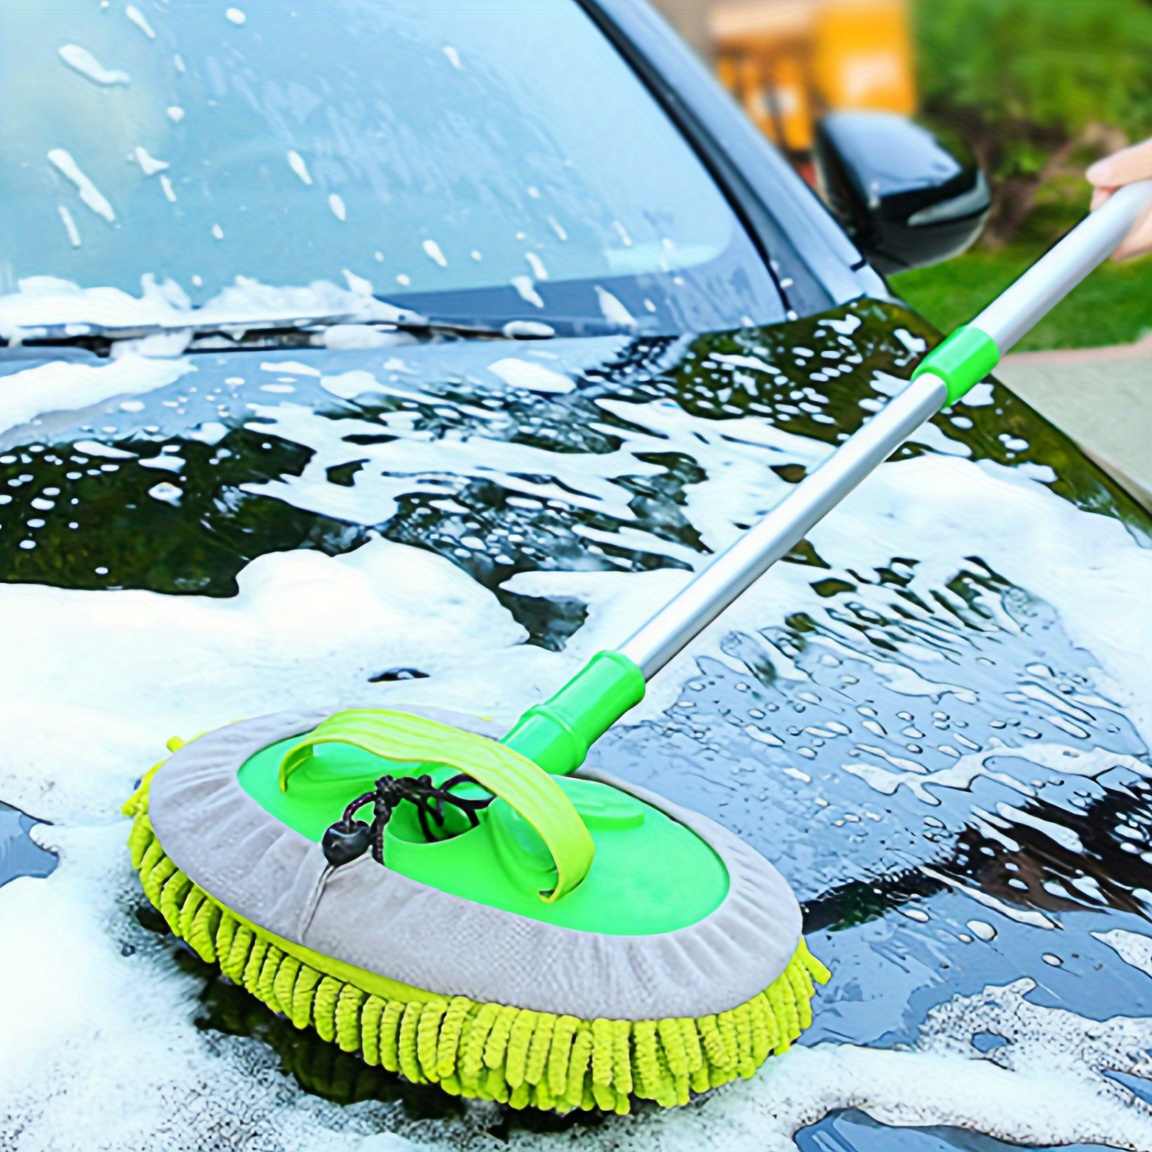 

Versatile Car Wash Mop With Adjustable Long Handle - Perfect For Cars, Rvs & Trucks - Ideal For Cleaning, Drying, Waxing & Polishing